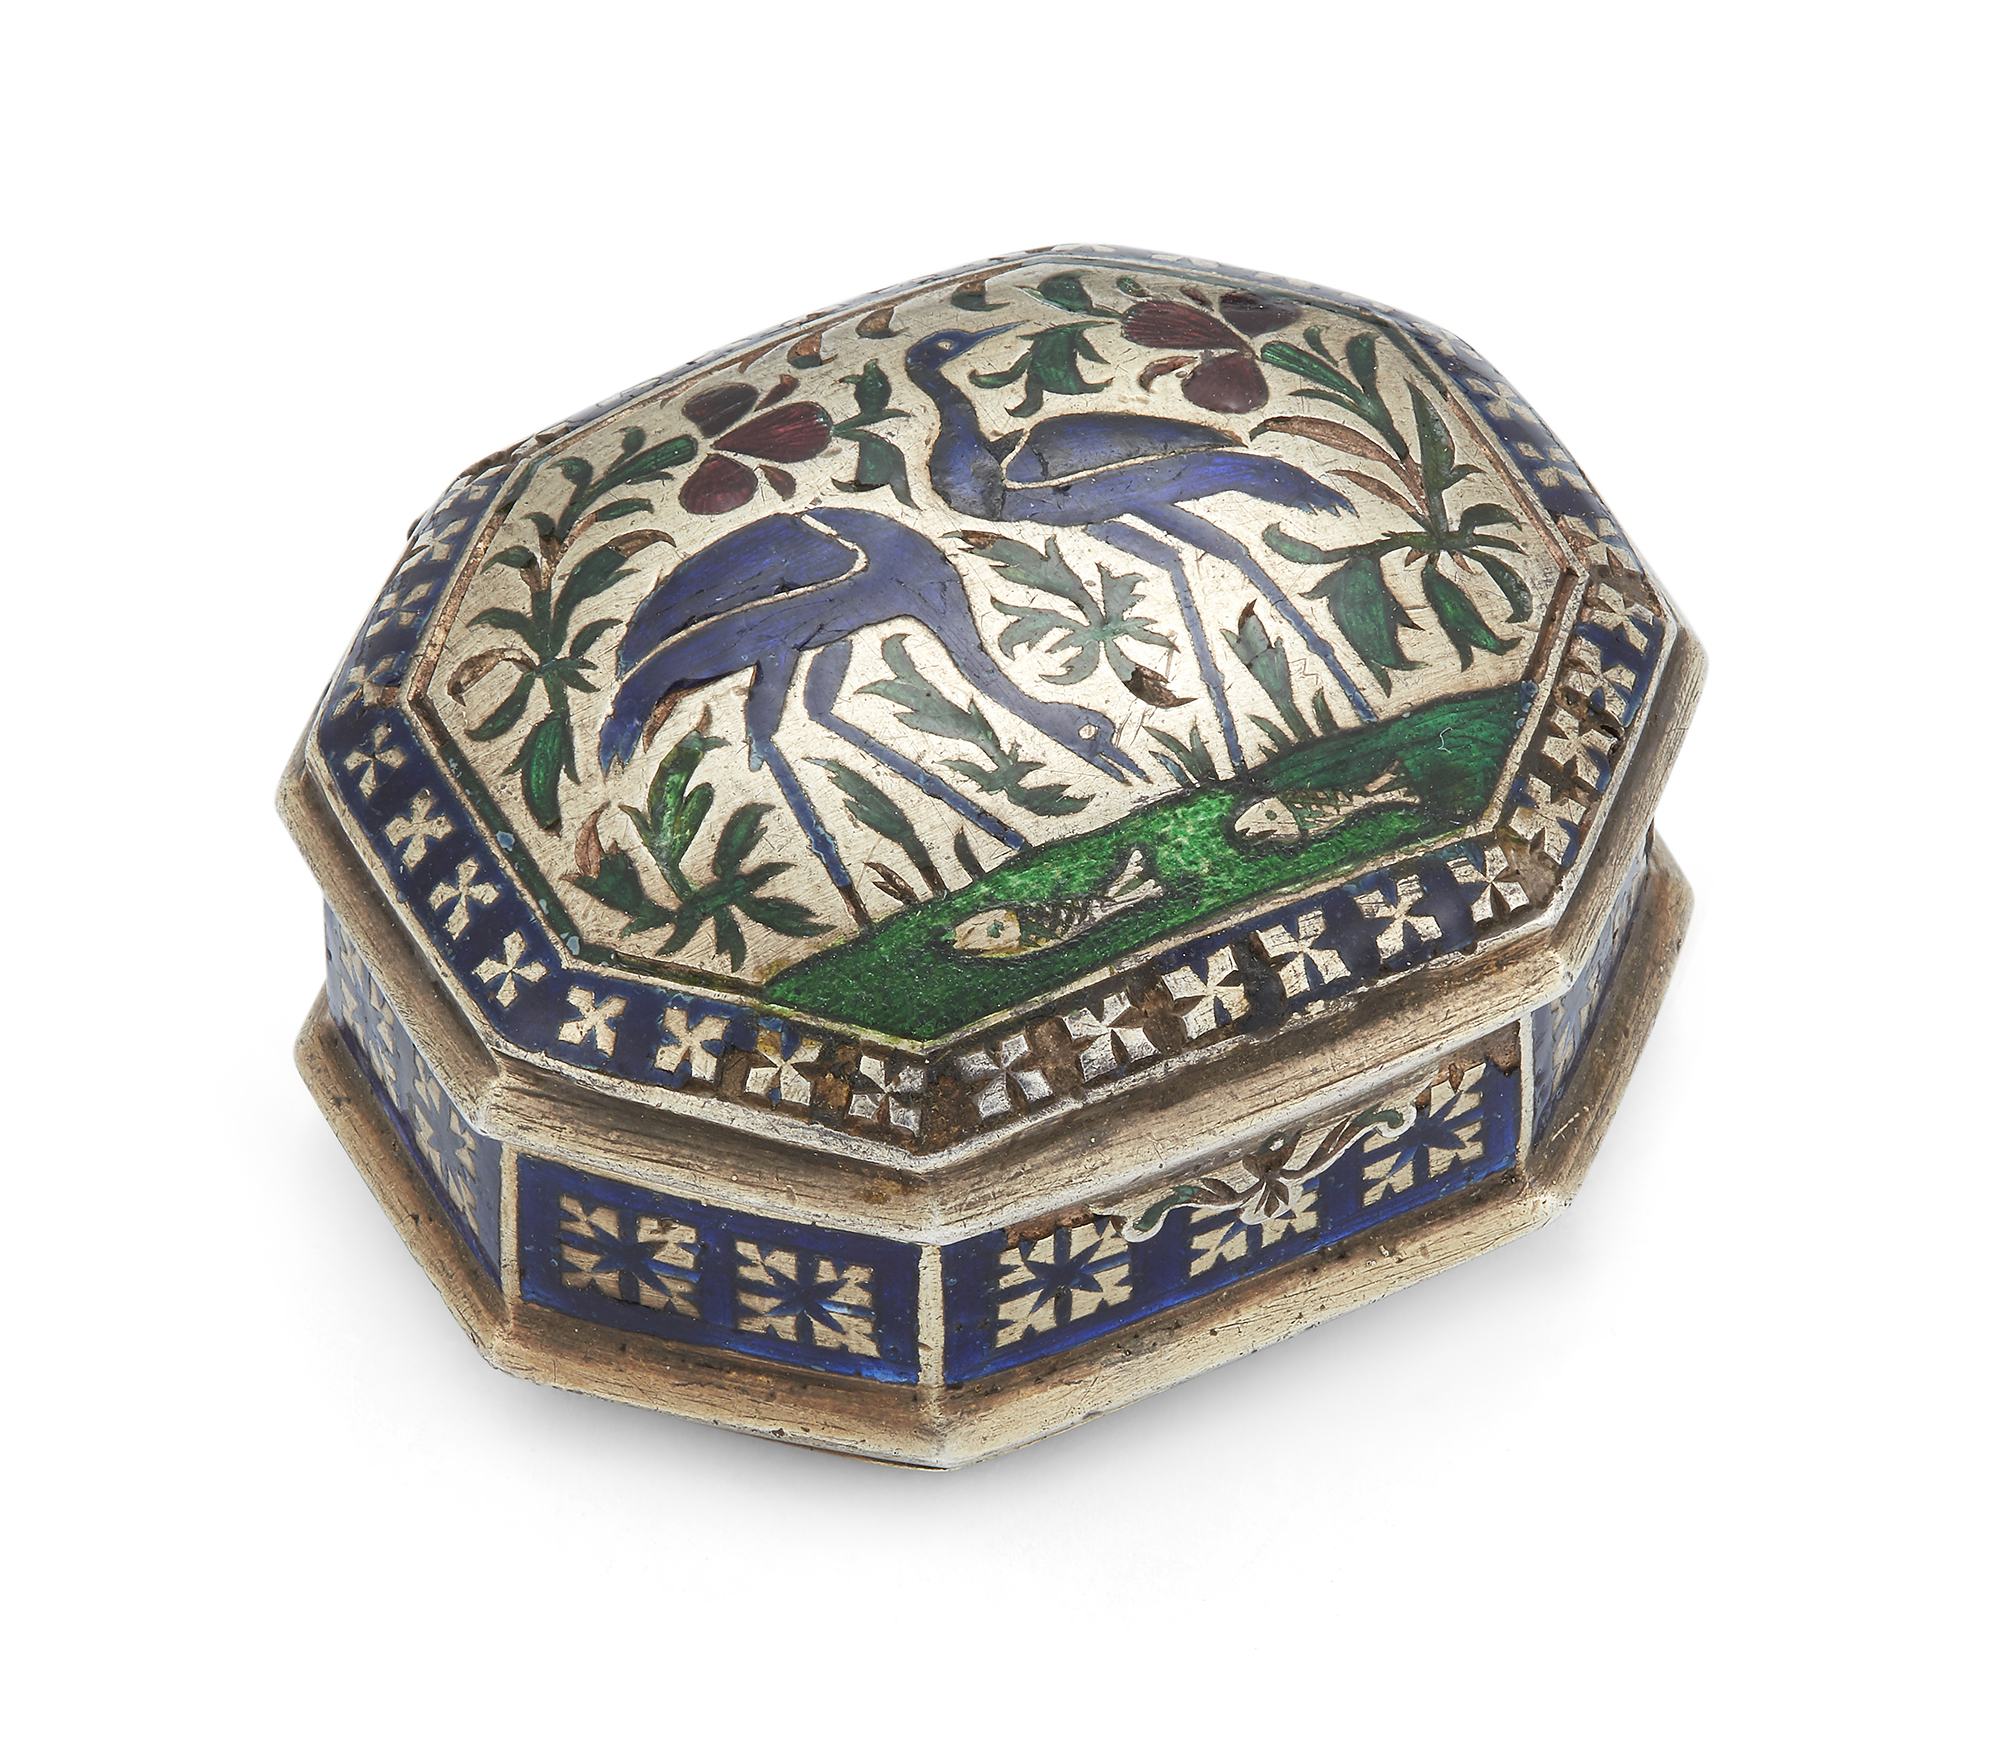 A small enameled silver box, Lucknow, North India, late 18th-19th century, rectangular with cut c...